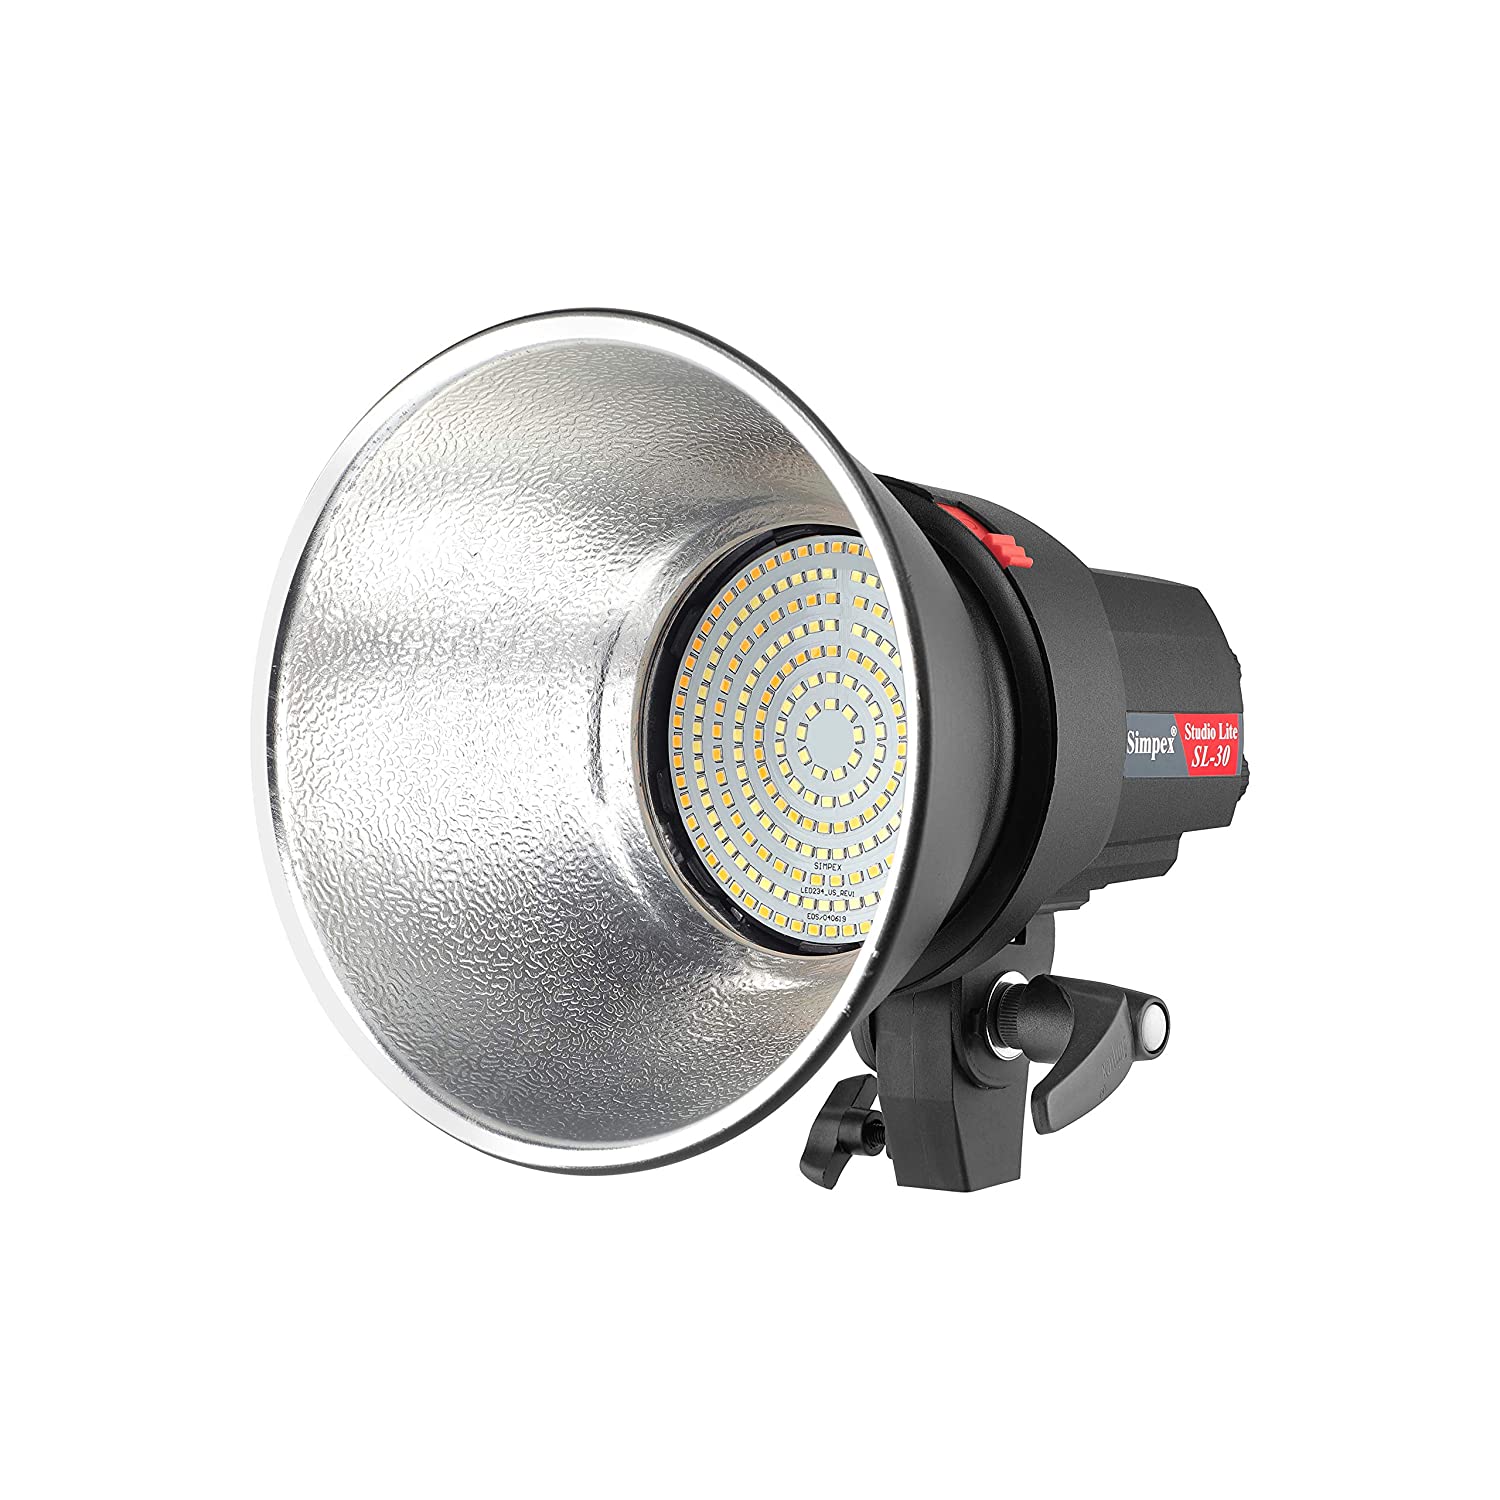 Simpex Sl 30W Dual Color Led Video Light for YouTube Video Shooting Portrait, Product Photography